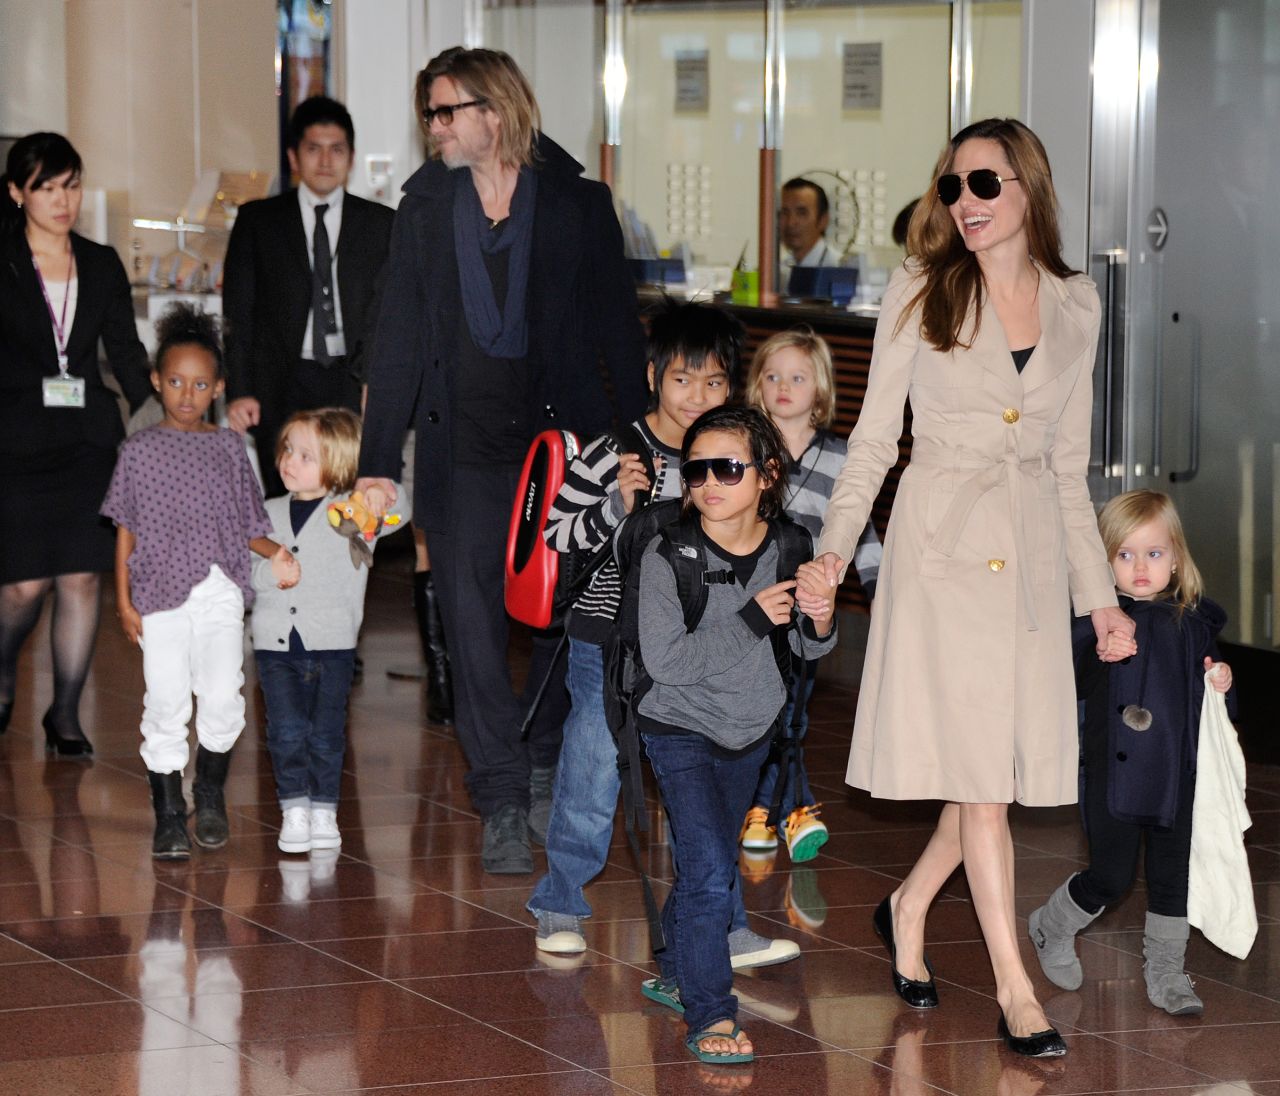 The actor seamlessly juggles motherhood and her role as a highly-acclaimed Hollywood superstar. With her partner, actor Brad Pitt, she takes care of six children while flying around the globe, making films and continuing her humanitarian efforts. 